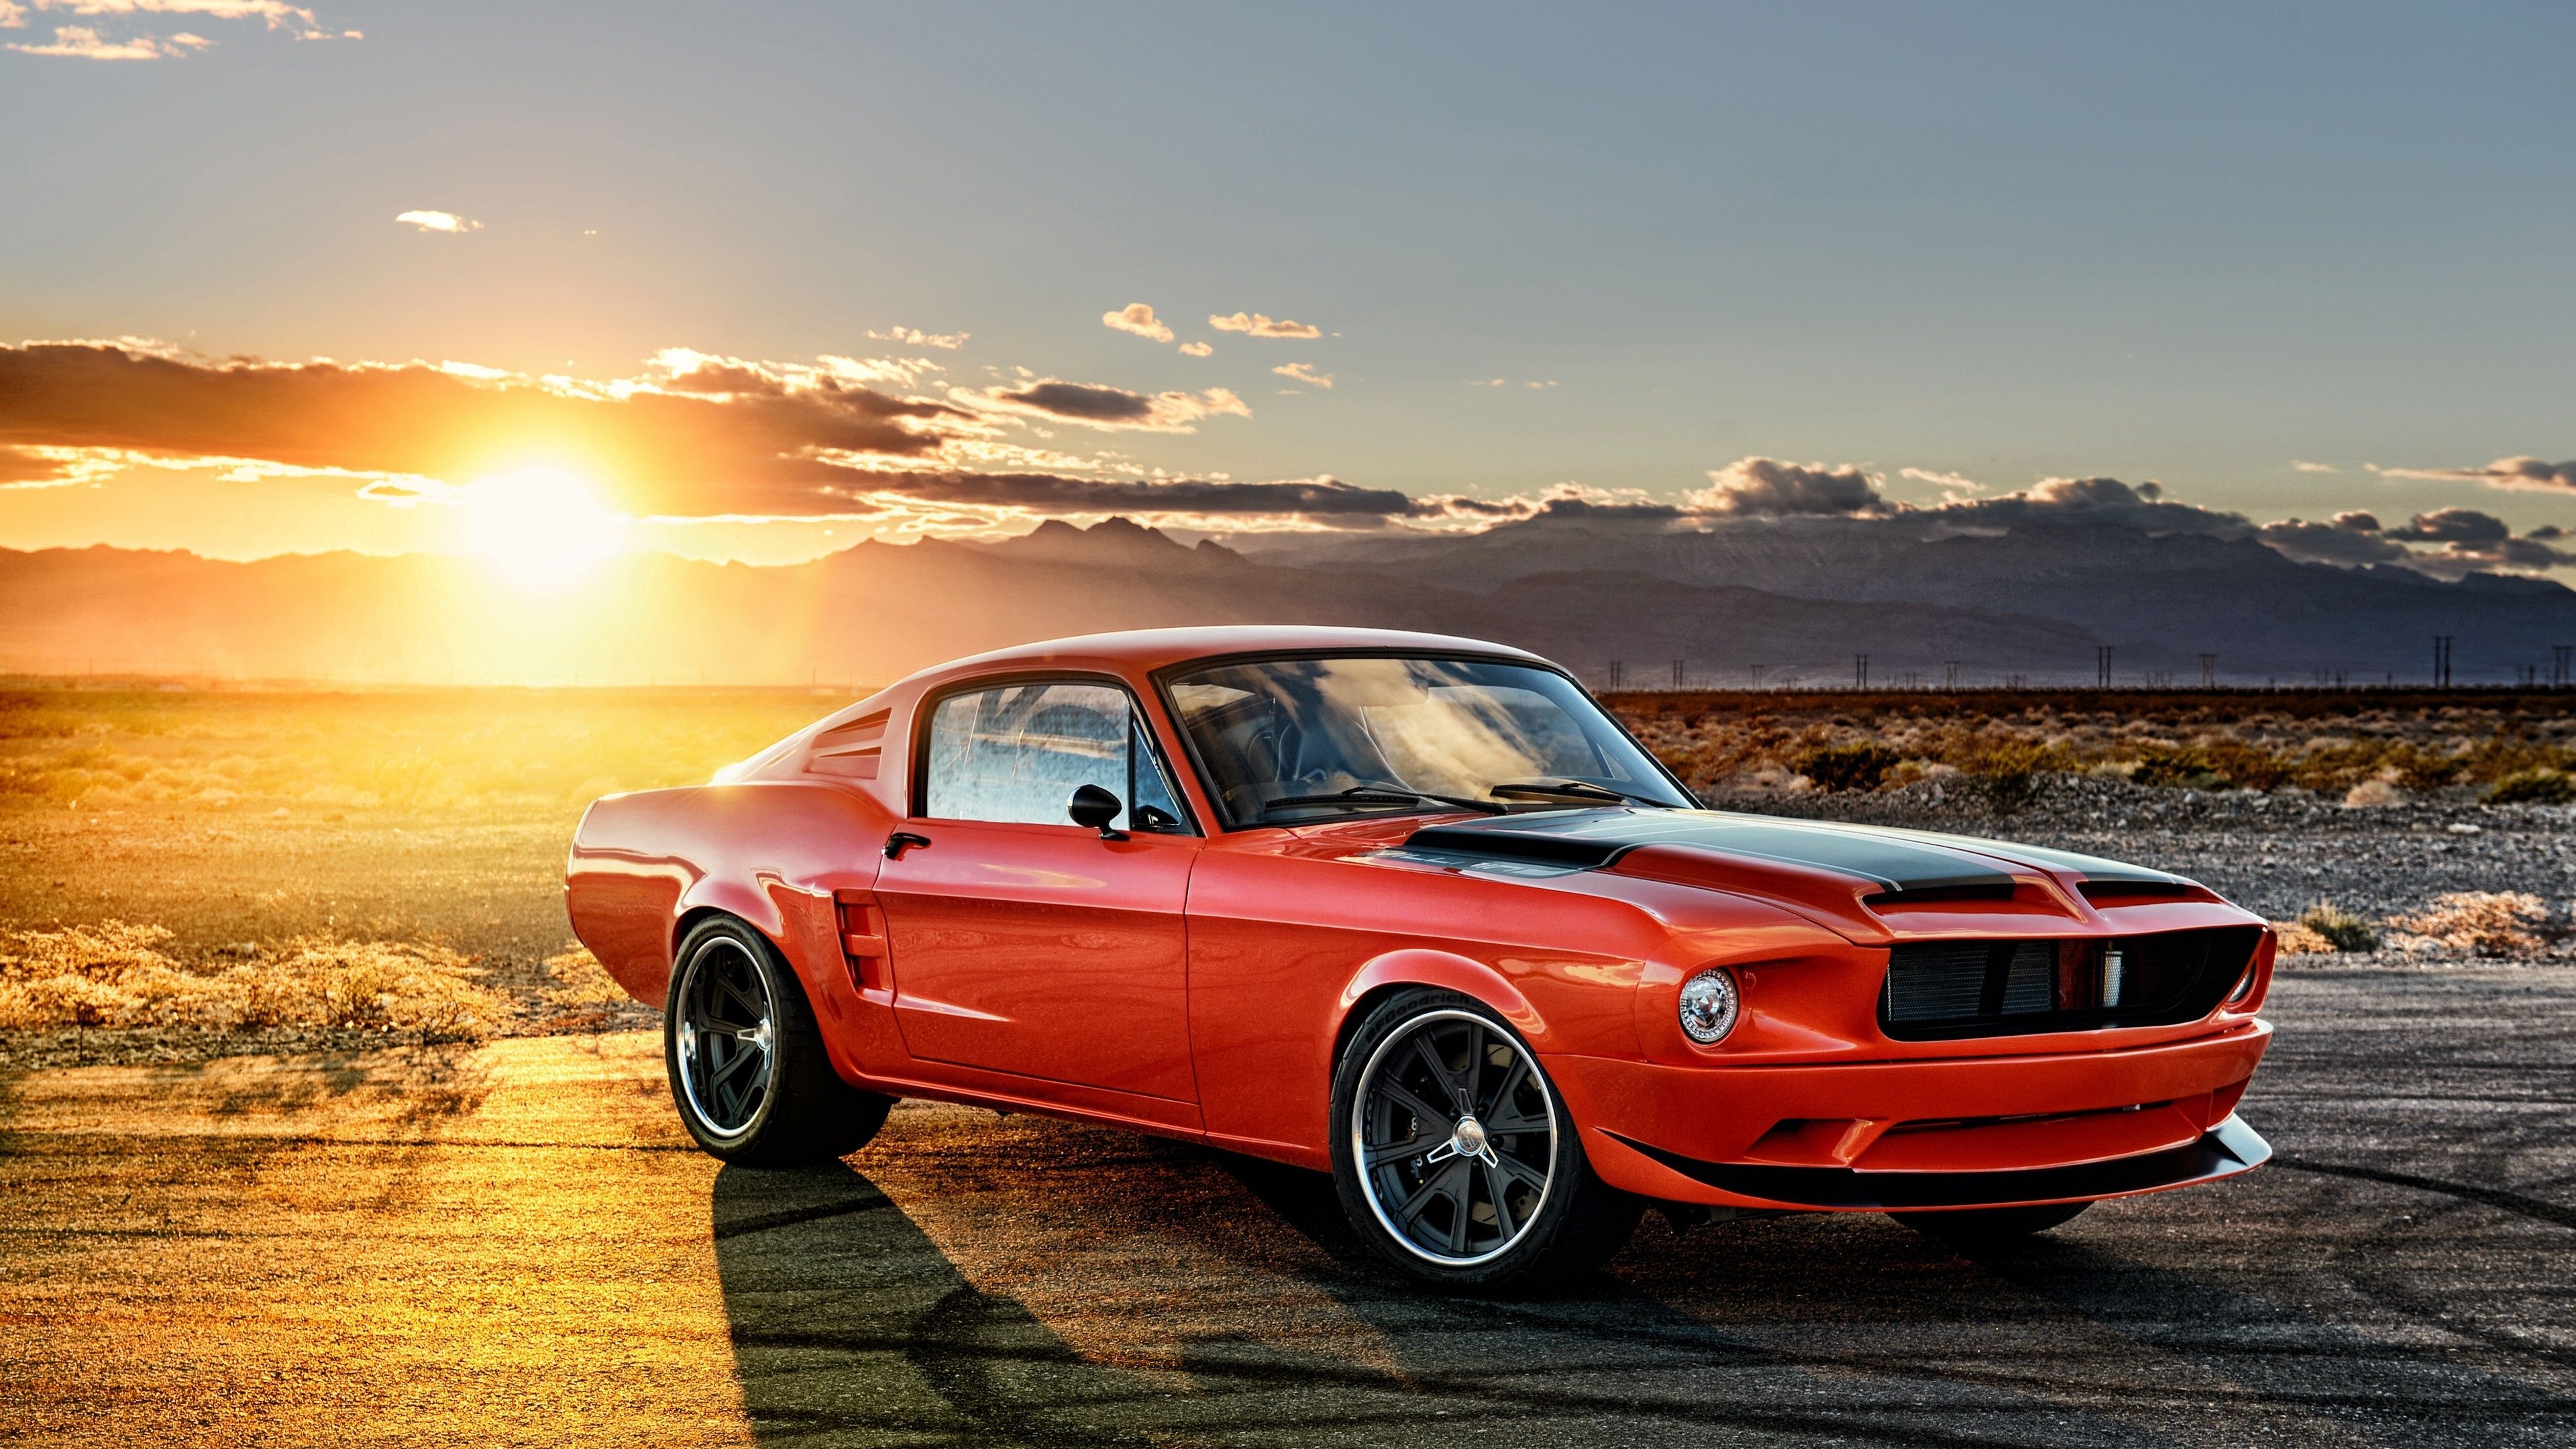 Vintage Ford Mustang, Classic collector's dream, Nostalgic lines, Sixties muscle heritage, Cherished pony car, 3840x2160 4K Desktop